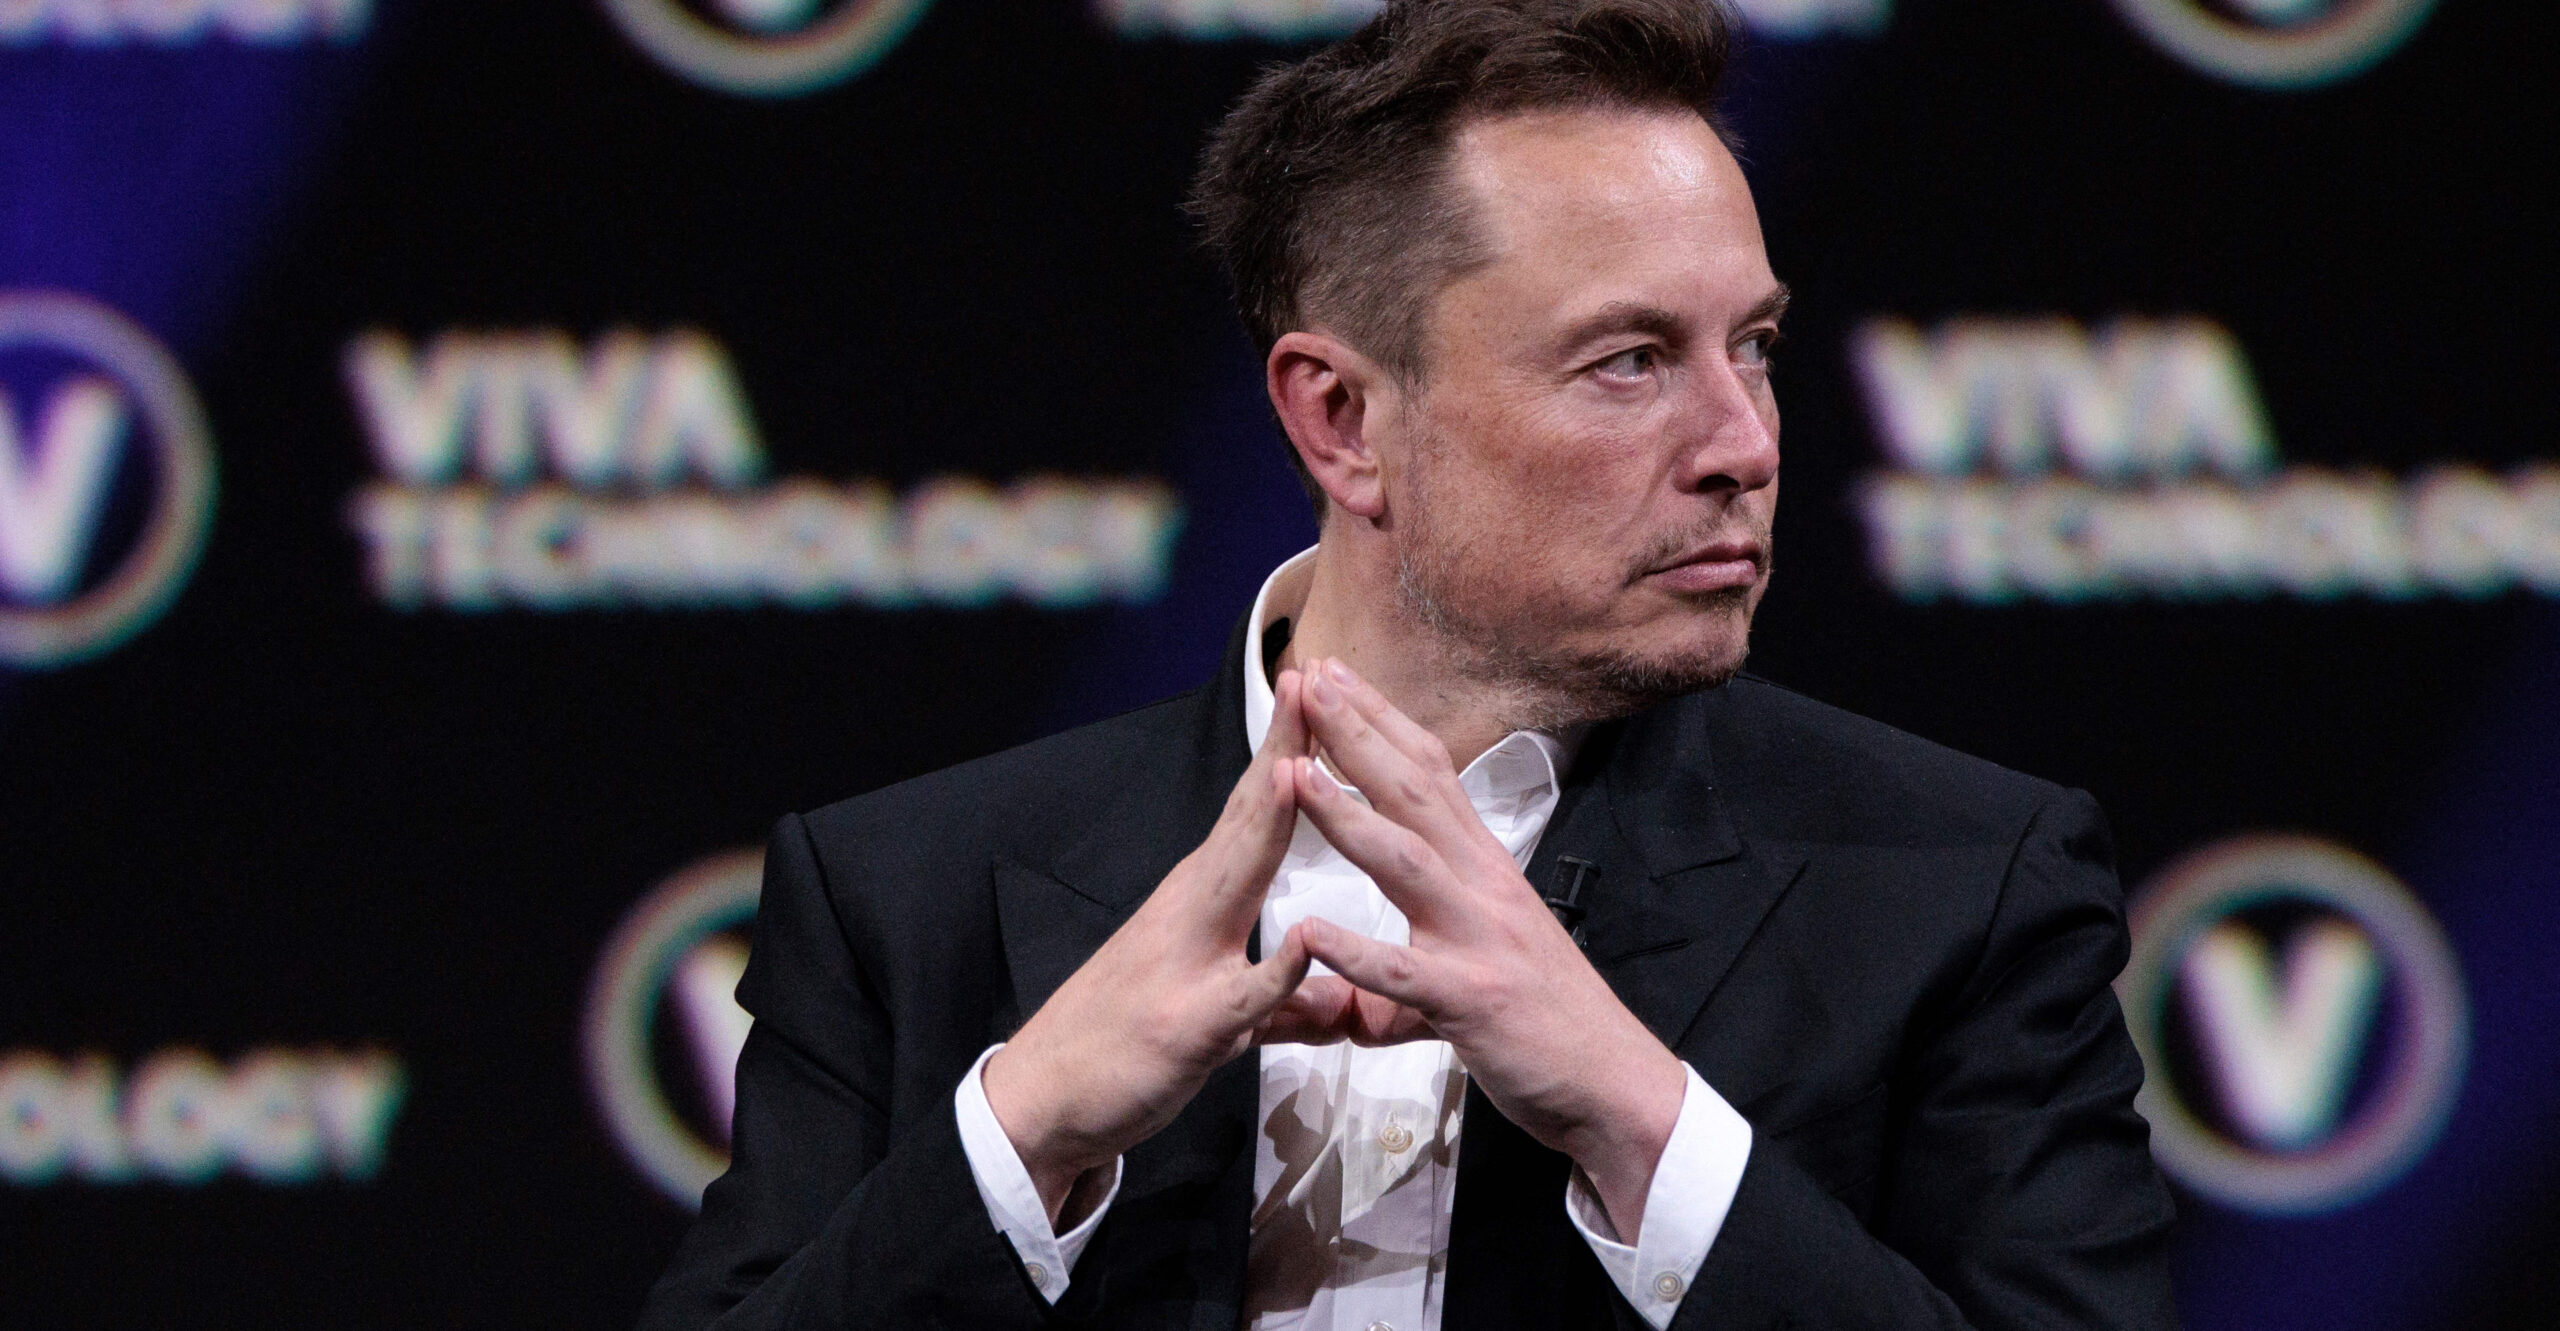 EXCLUSIVE: Elon Musk Challenged to Stand Against State Censorship